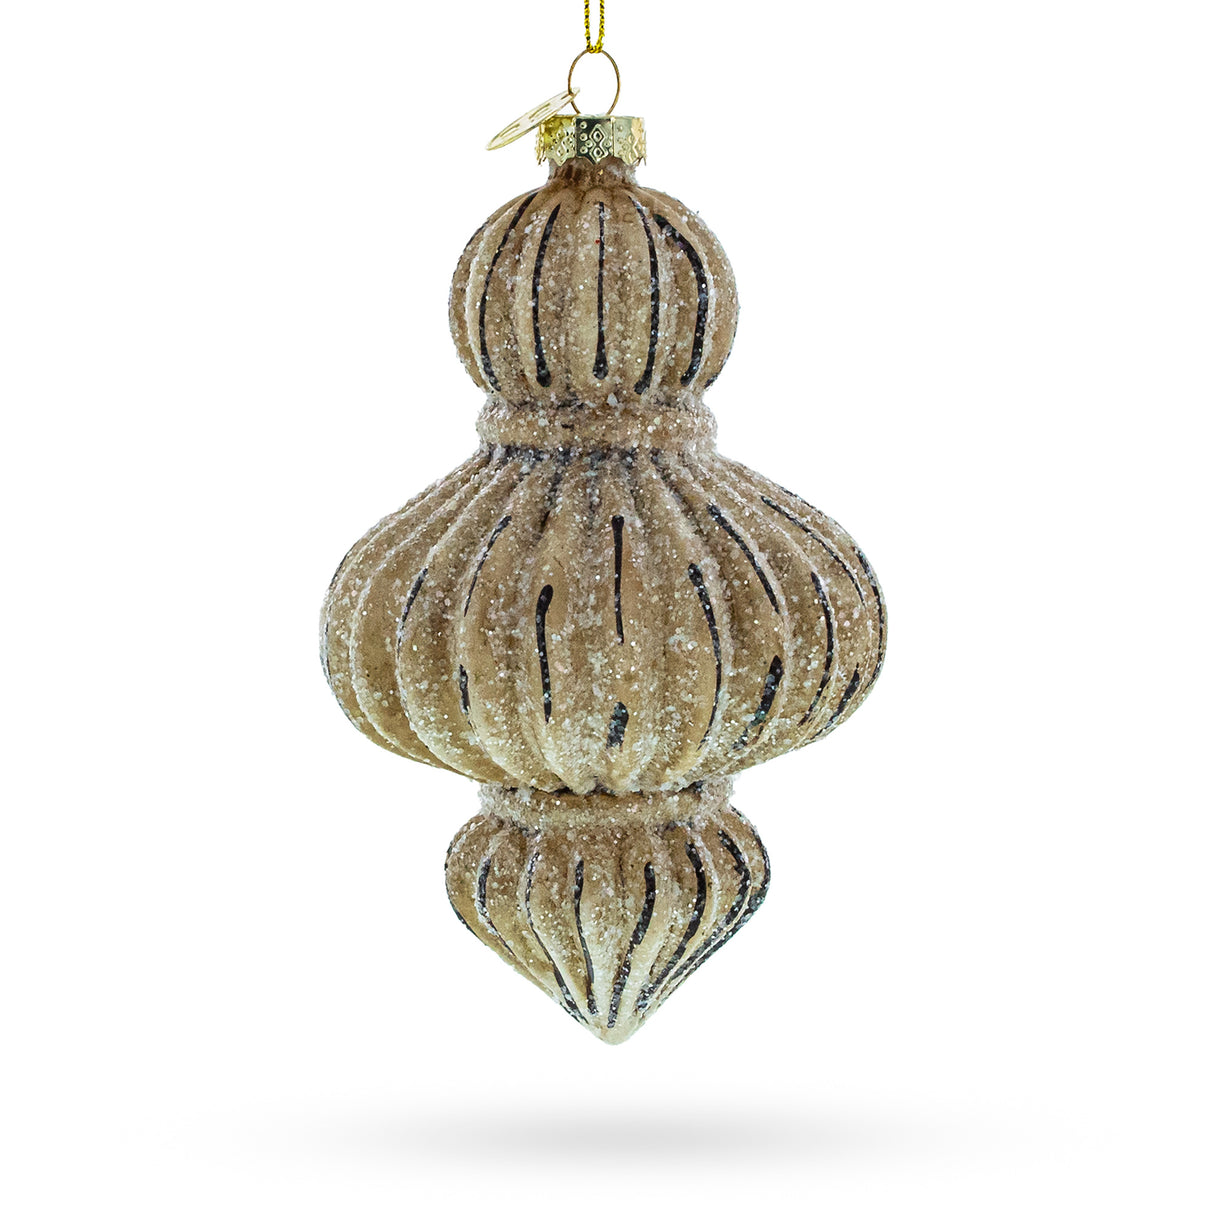 Vintage-Inspired Finial Blown Glass Christmas Ornament in Beige color,  shape